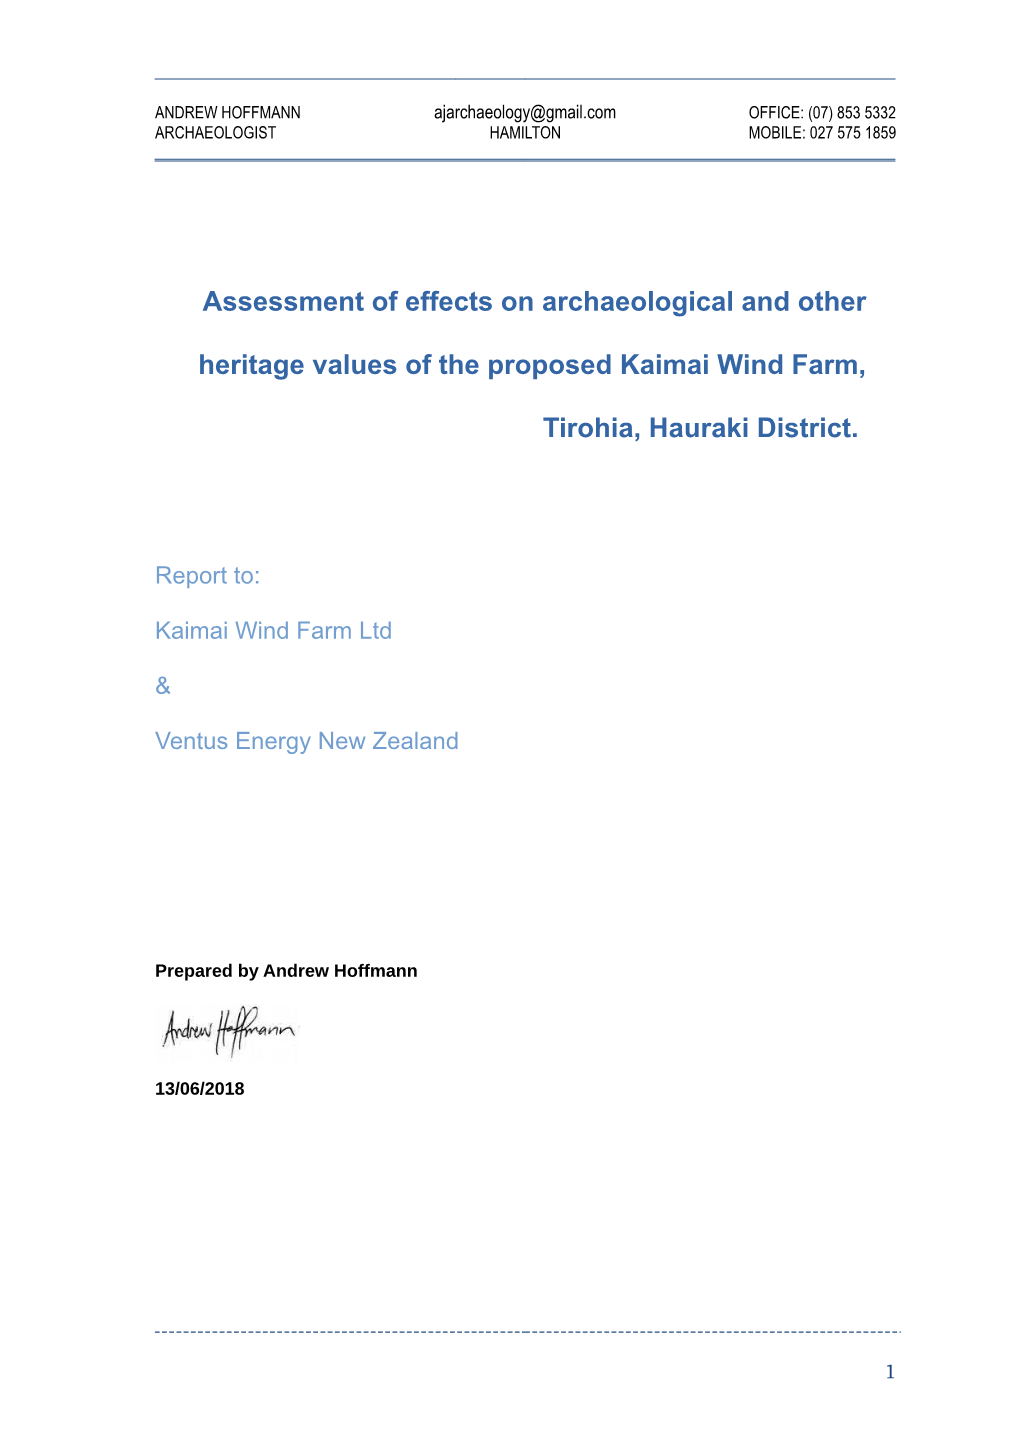 Assessment of Effects on Archaeological and Other Heritage Values of the Proposed Kaimai Wind Farm, Tirohia, Hauraki District. 13/06/2018